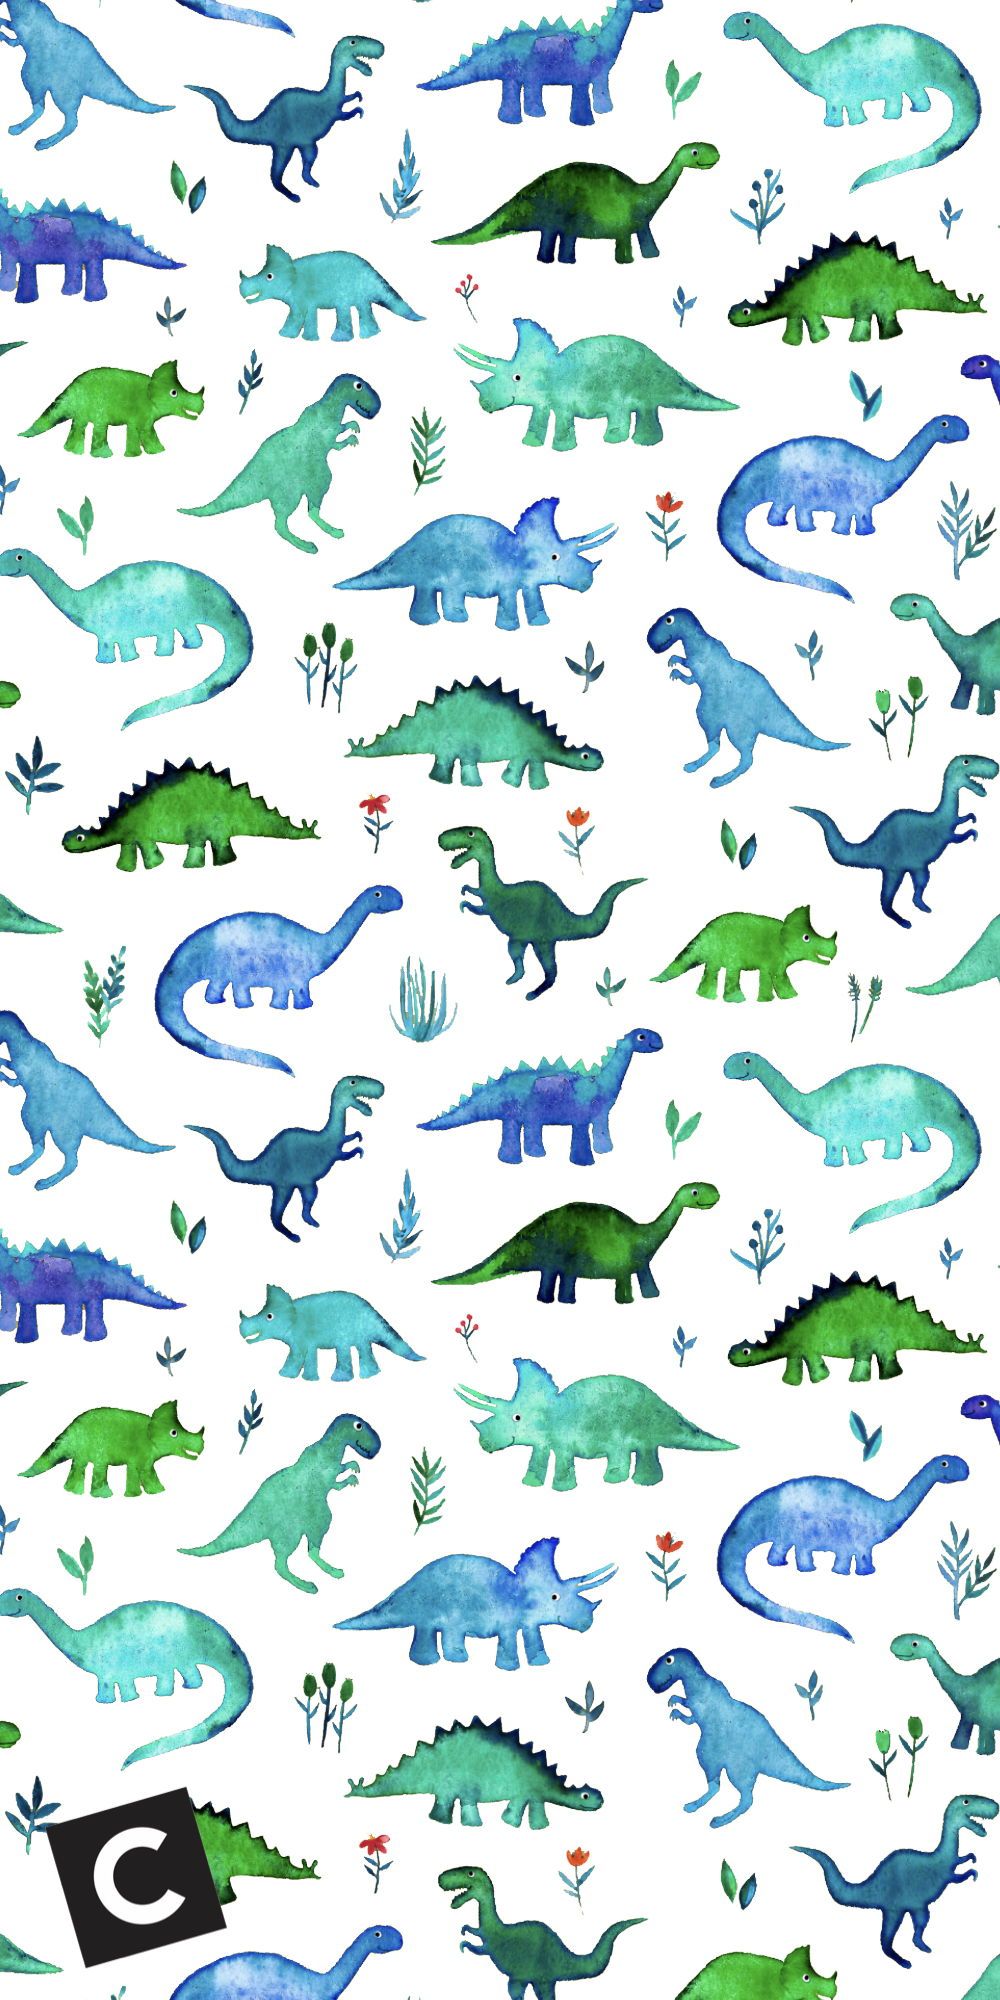 Outstanding Wallpaper Aesthetic Dino Cute You Can Save It Free Of